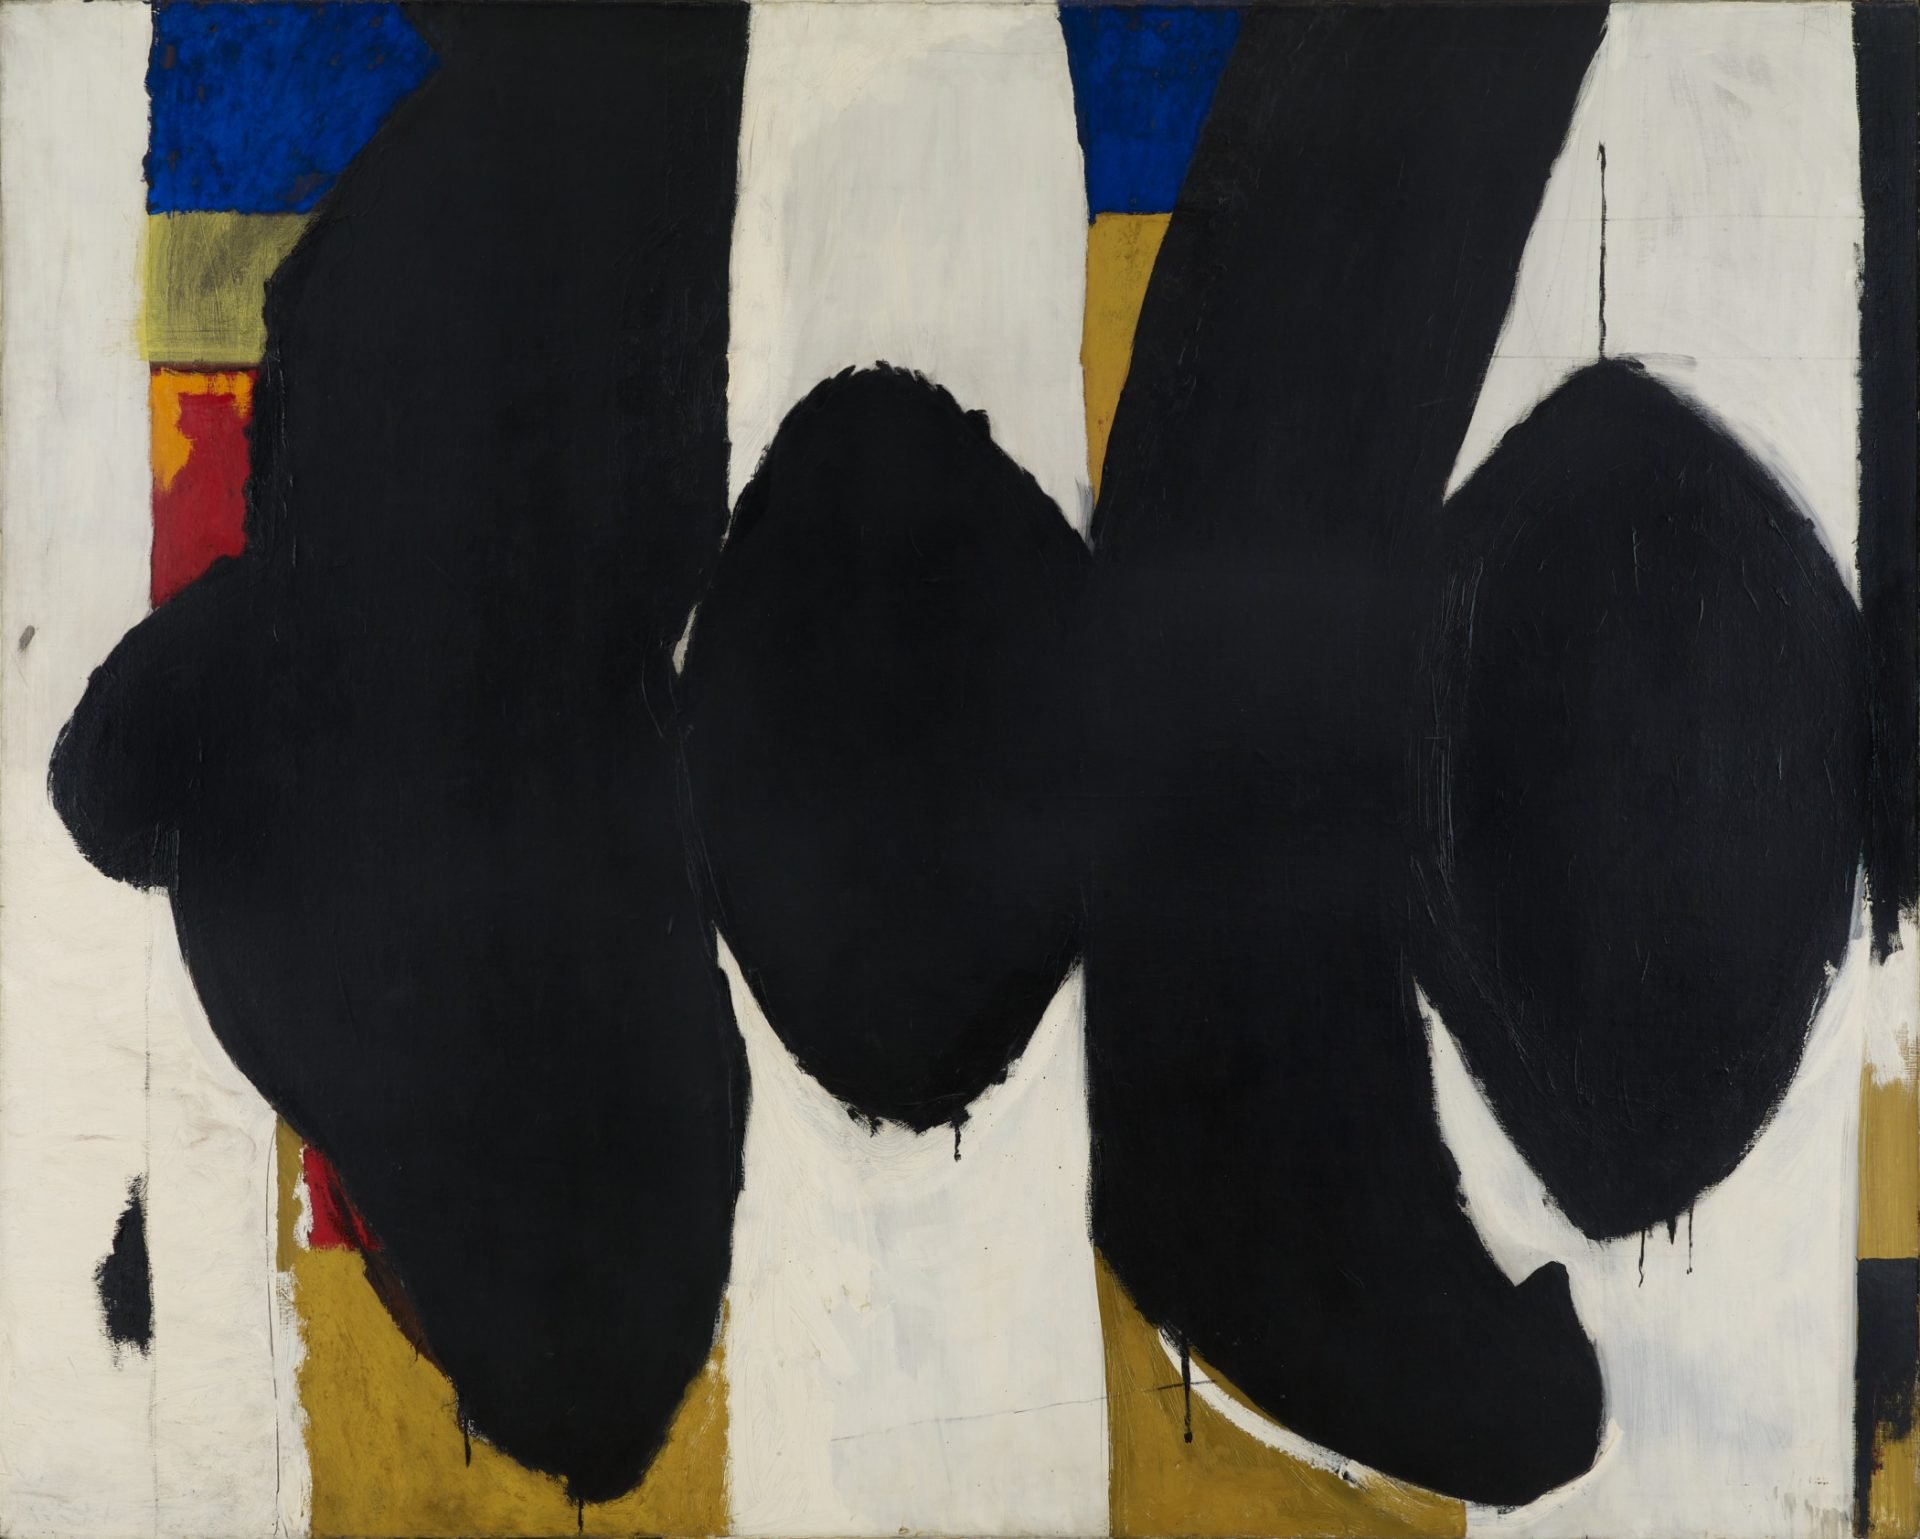  "Elegy to the Spanish Republic XXXIV" by Robert Motherwell, 1953-1954, an abstract painting with large black shapes against a white background with patches of yellow, red, and blue, creating a dynamic meandering composition.